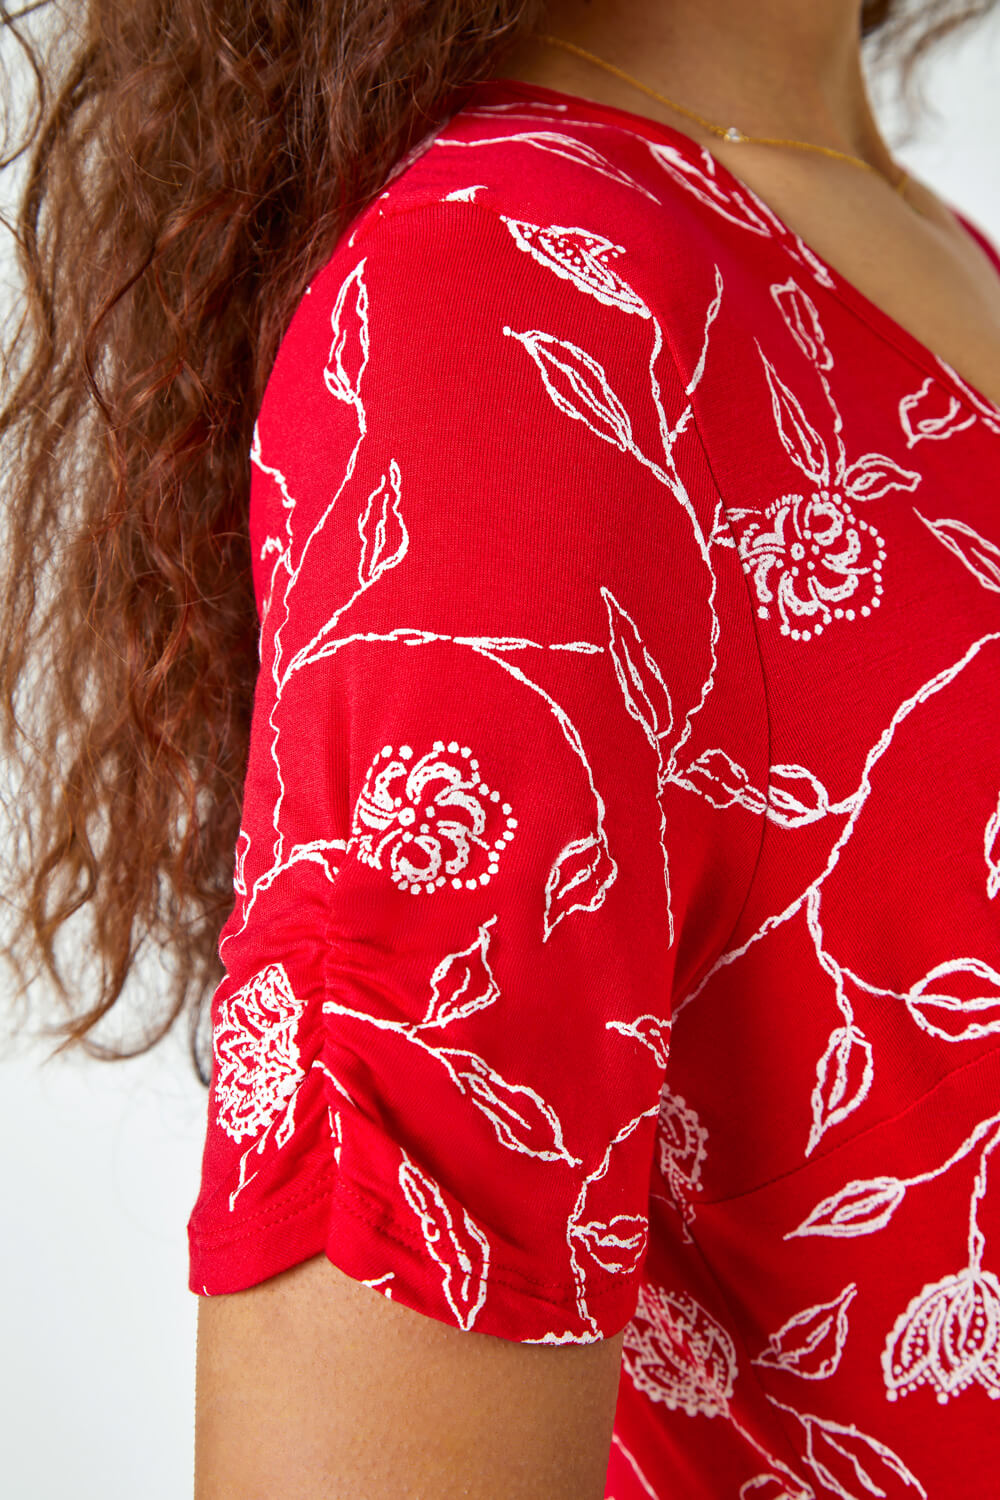 Red Floral Print Midi Wrap Stretch Dress, Image 5 of 5